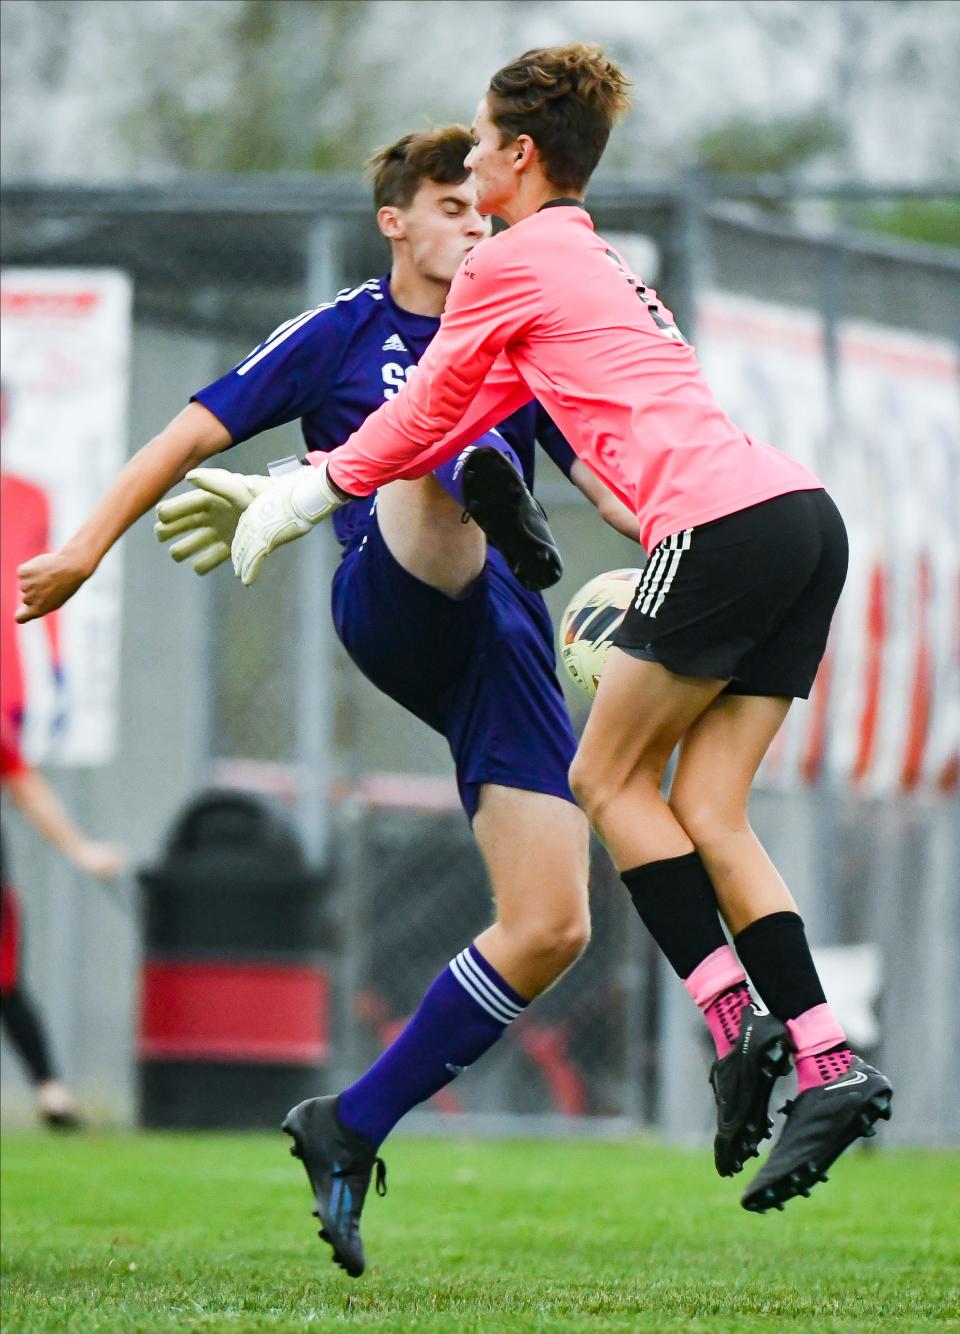 Bloomington South’s James Ryan (23) and Martinsville goalie Quinlan McGown collide going after the ball during their IHSAA Boys’ soccer sectional match at Terre Haute South on Wednesday, Oct. 4, 2023. Ryan would score on the play.